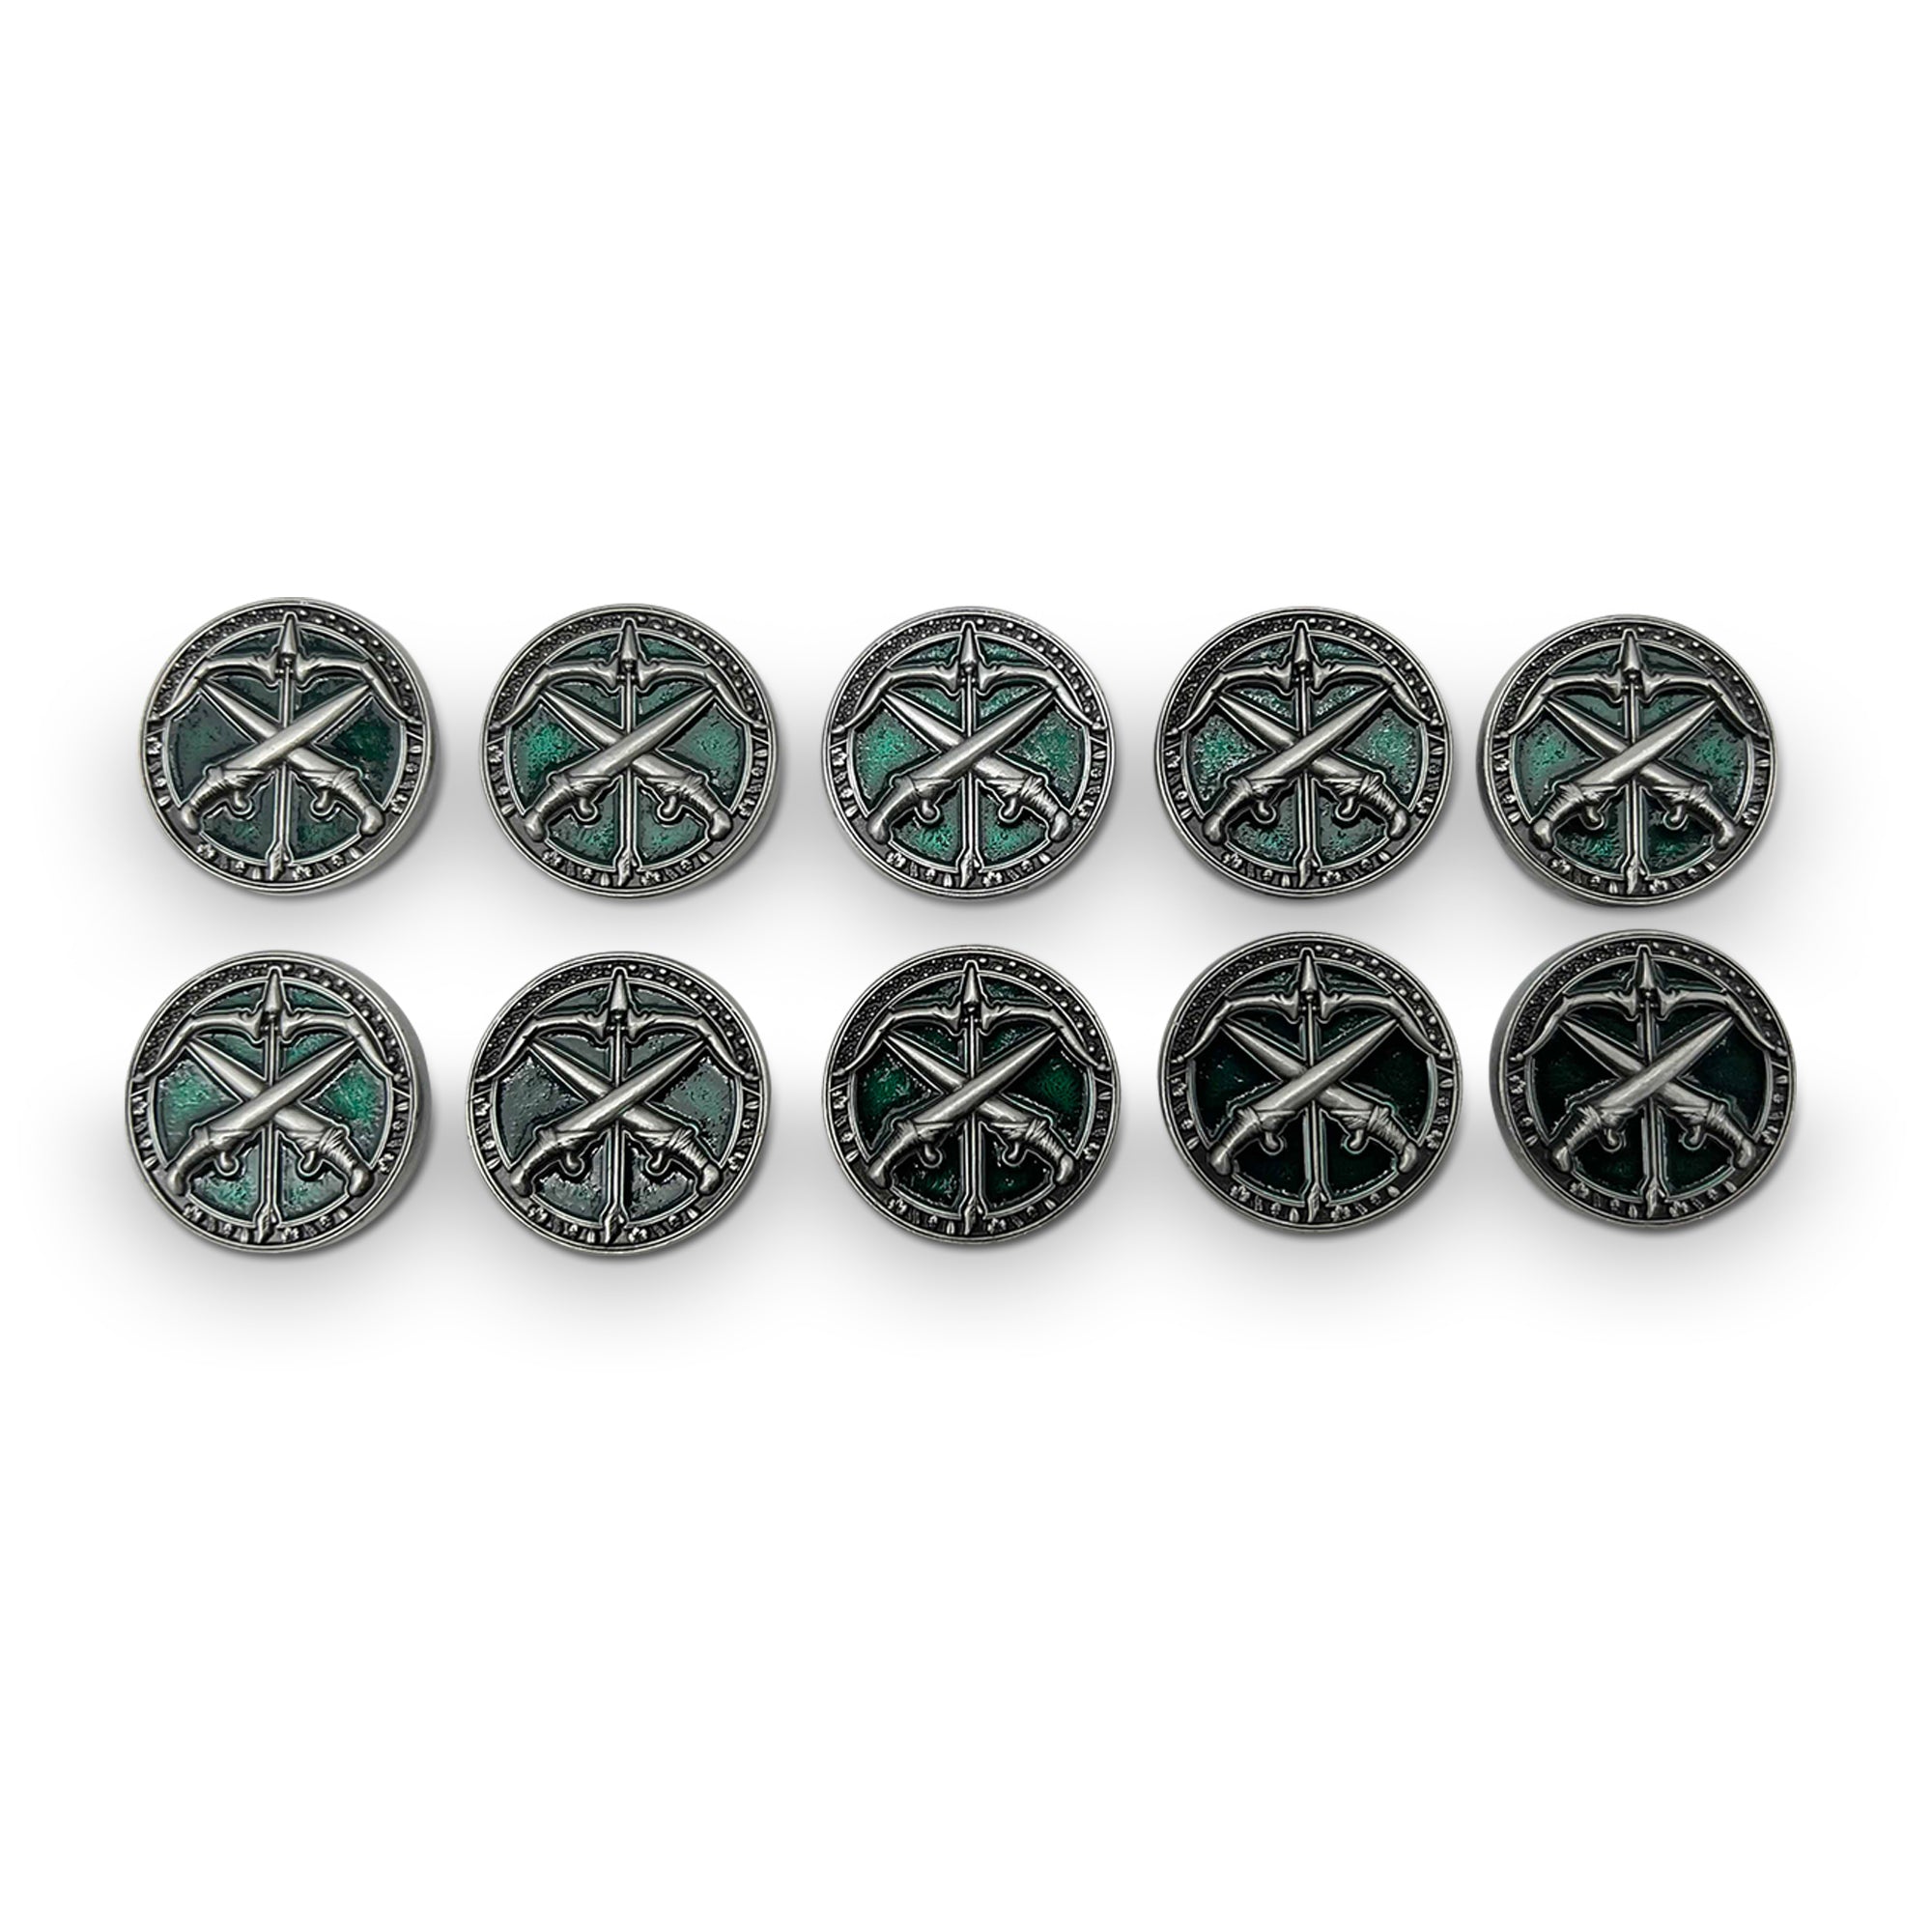 Profession Coins - Ranger Metal Coins Set of 10 - NOR 03414